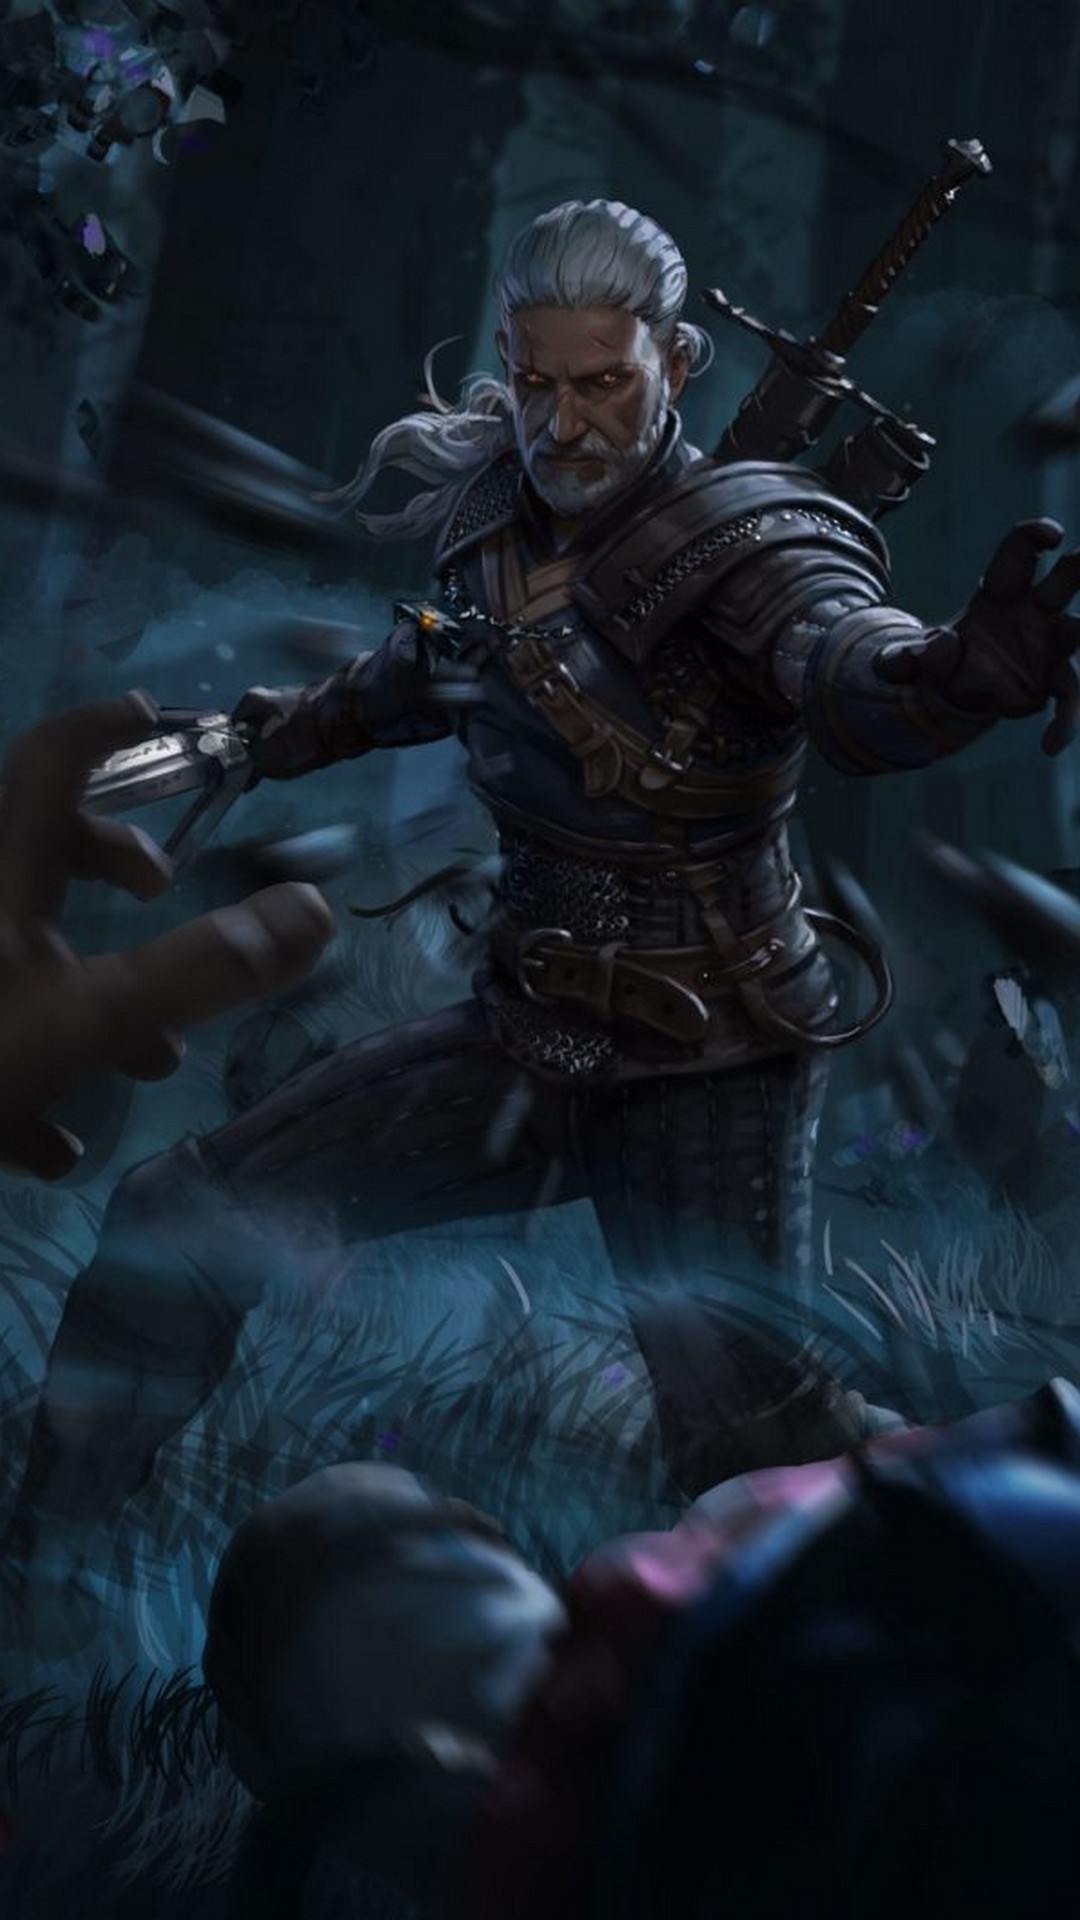 Phones Wallpaper The Witcher with high-resolution 1080x1920 pixel. Download all Mobile Wallpapers and Use them as wallpapers for your iPhone, Tablet, iPad, Android and other mobile devices